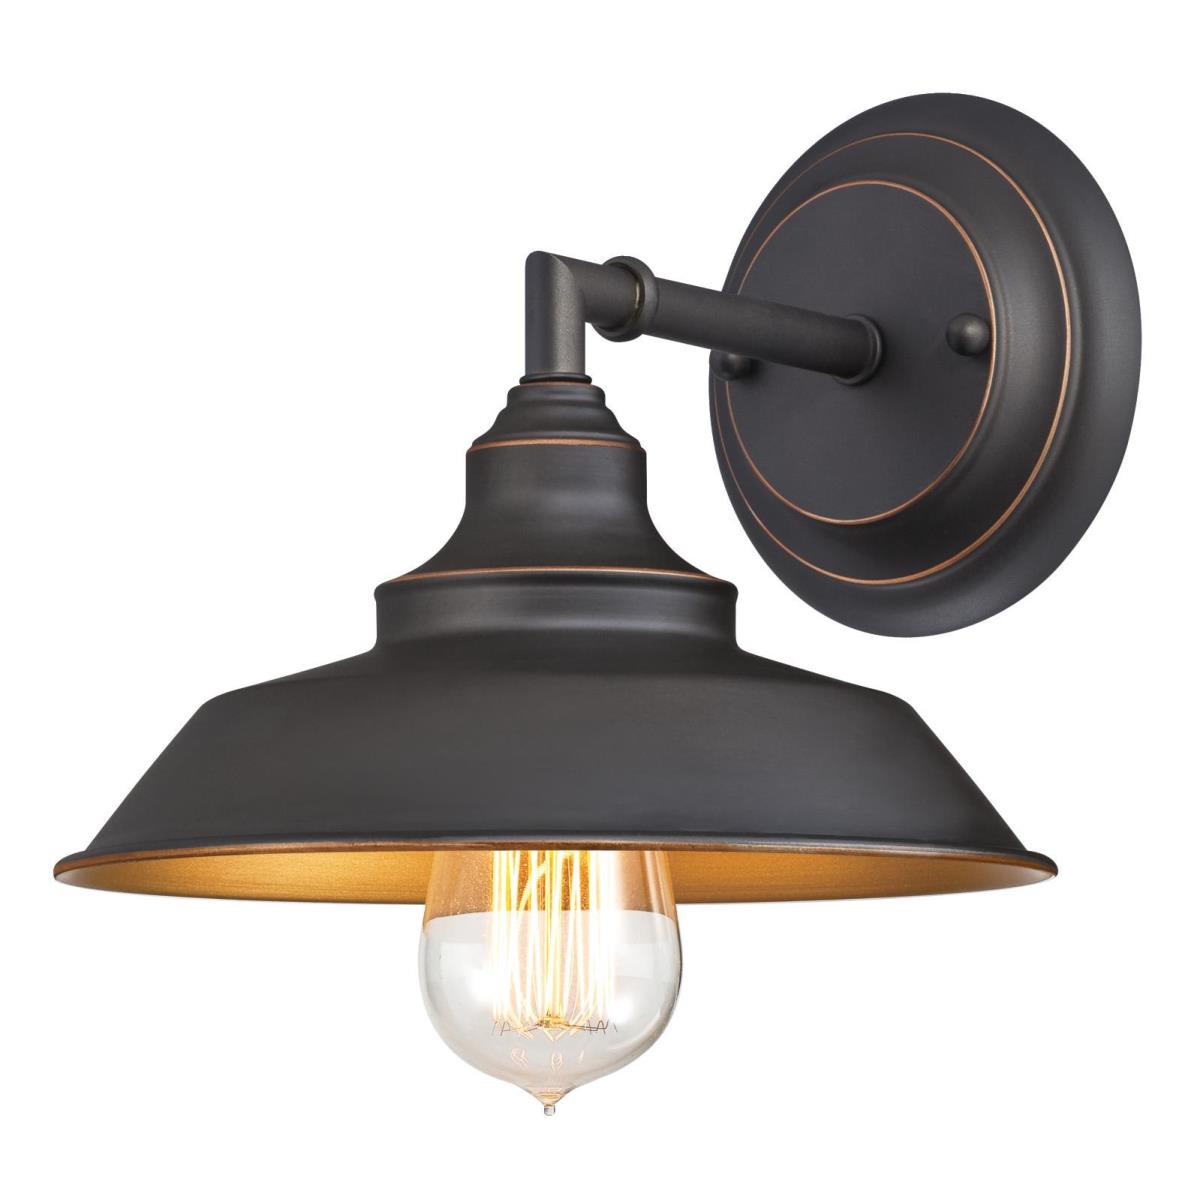 1 Light Wall Fixture Oil Rubbed Bronze Finish with Highlights and Metallic Bronze Interior